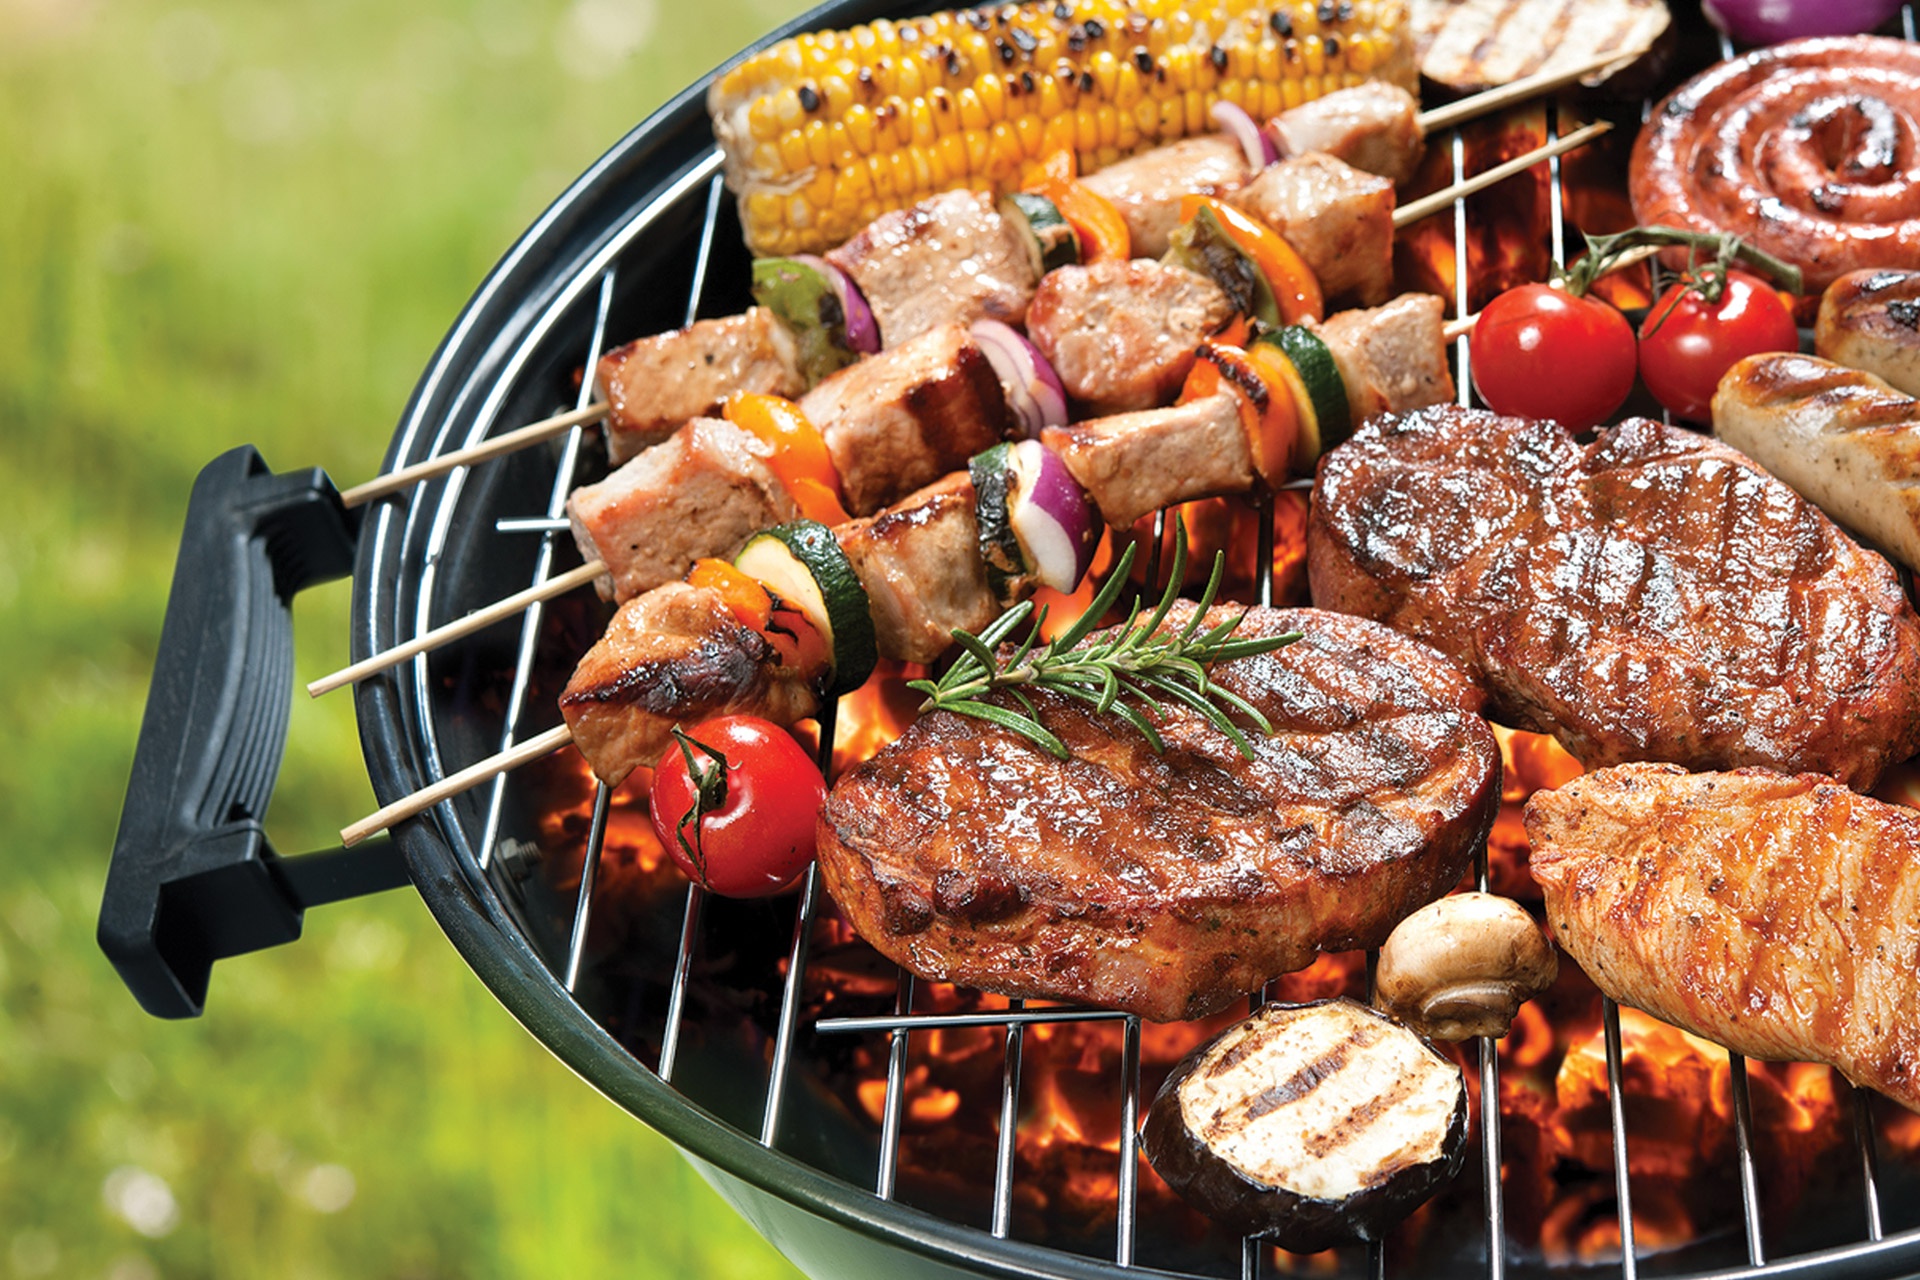 General 1920x1280 meat vegetables barbecue grill corn cooking steak tomatoes mushroom sausage rosemary red onion bell peppers food zucchini (vegetable) beef